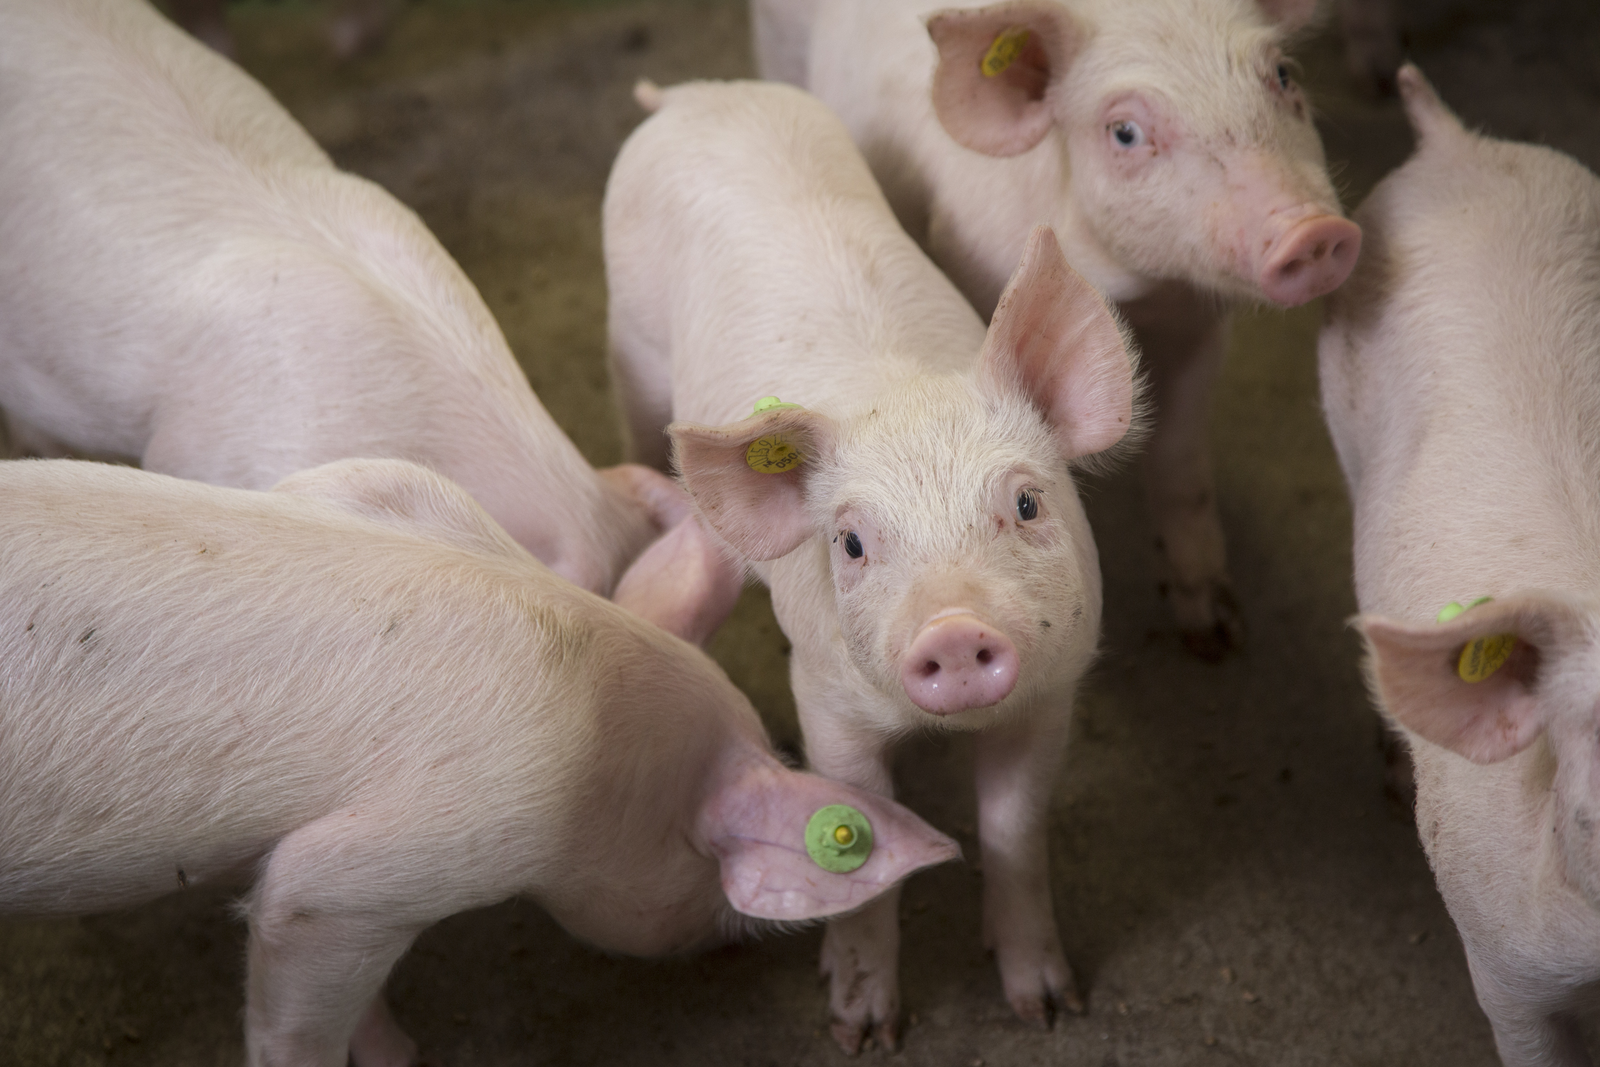 The toxic effects induced by DON are well characterised in most production animals, with  pigs  being  the  most  susceptible.<br />[Photo: Koos Groenewold]